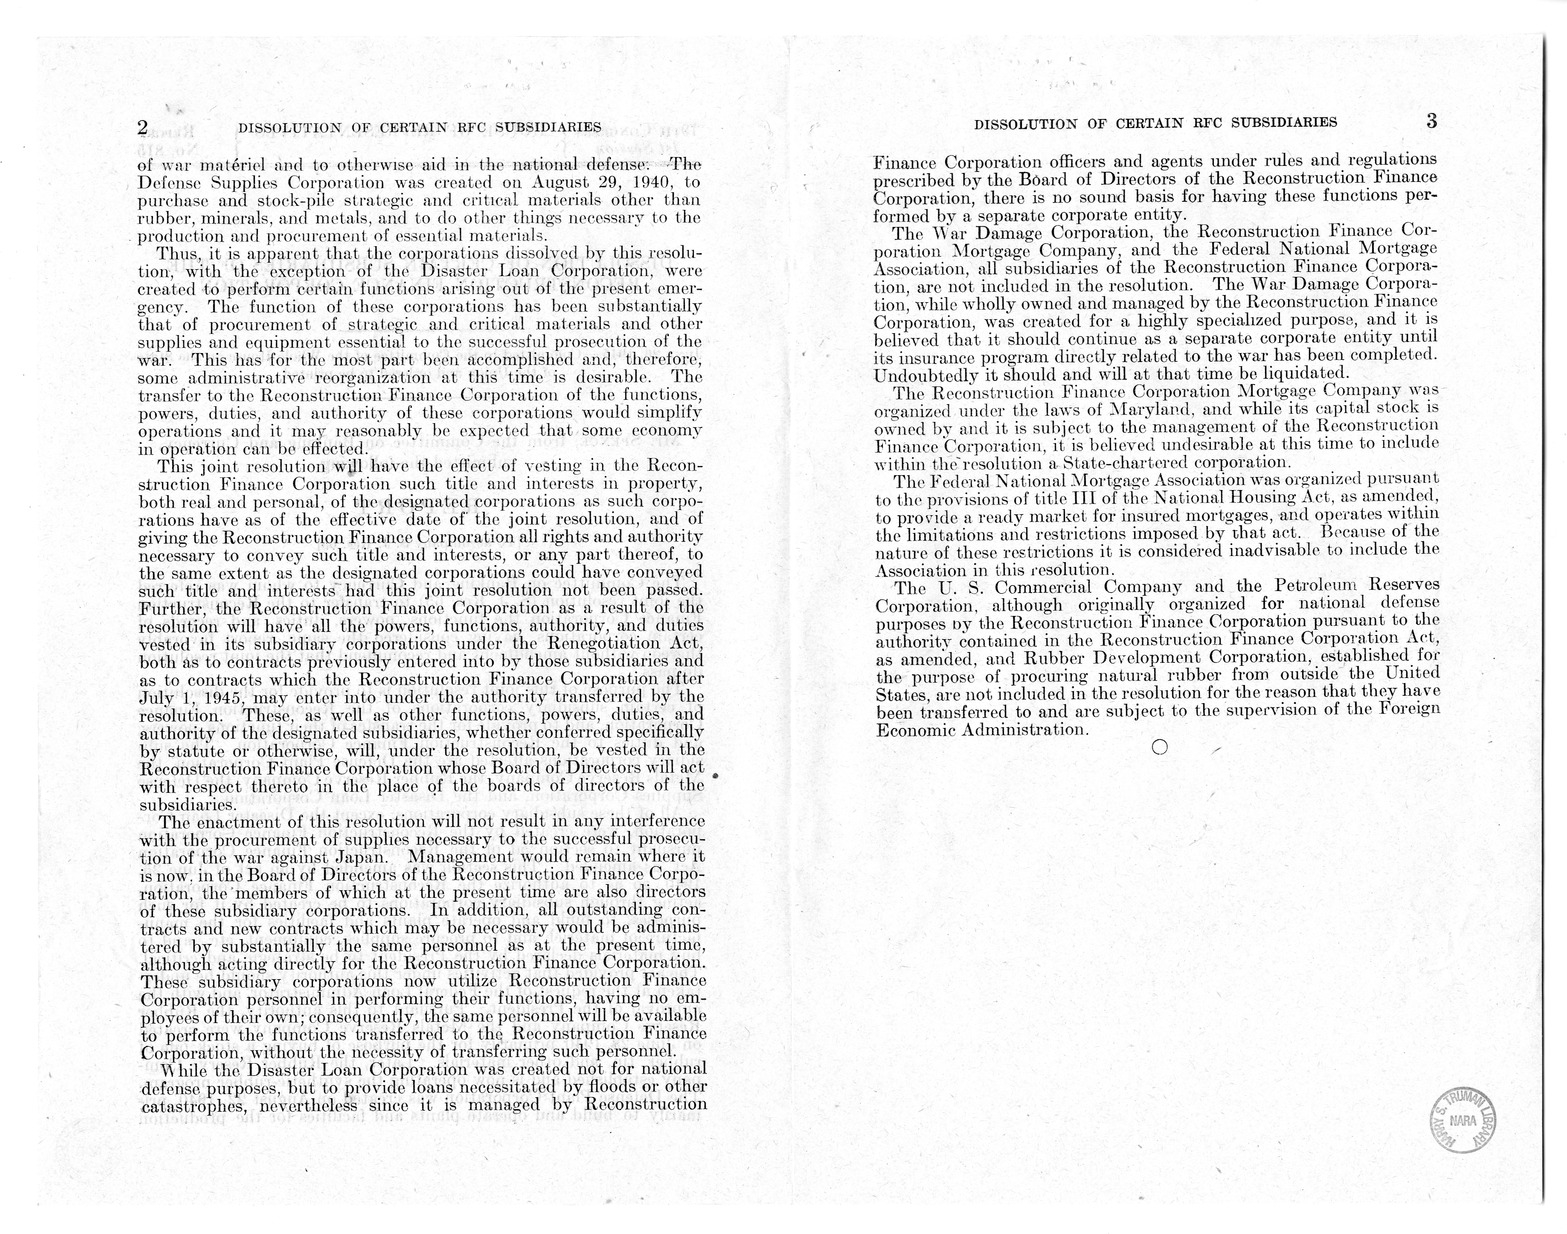 Memorandum from Harold D. Smith to M. C. Latta, S.J. Res. 65, To Transfer to the Reconstruction on Finance Corporation the Functions, Powers, Duties, and Records of Certain Corporations, with Attachments